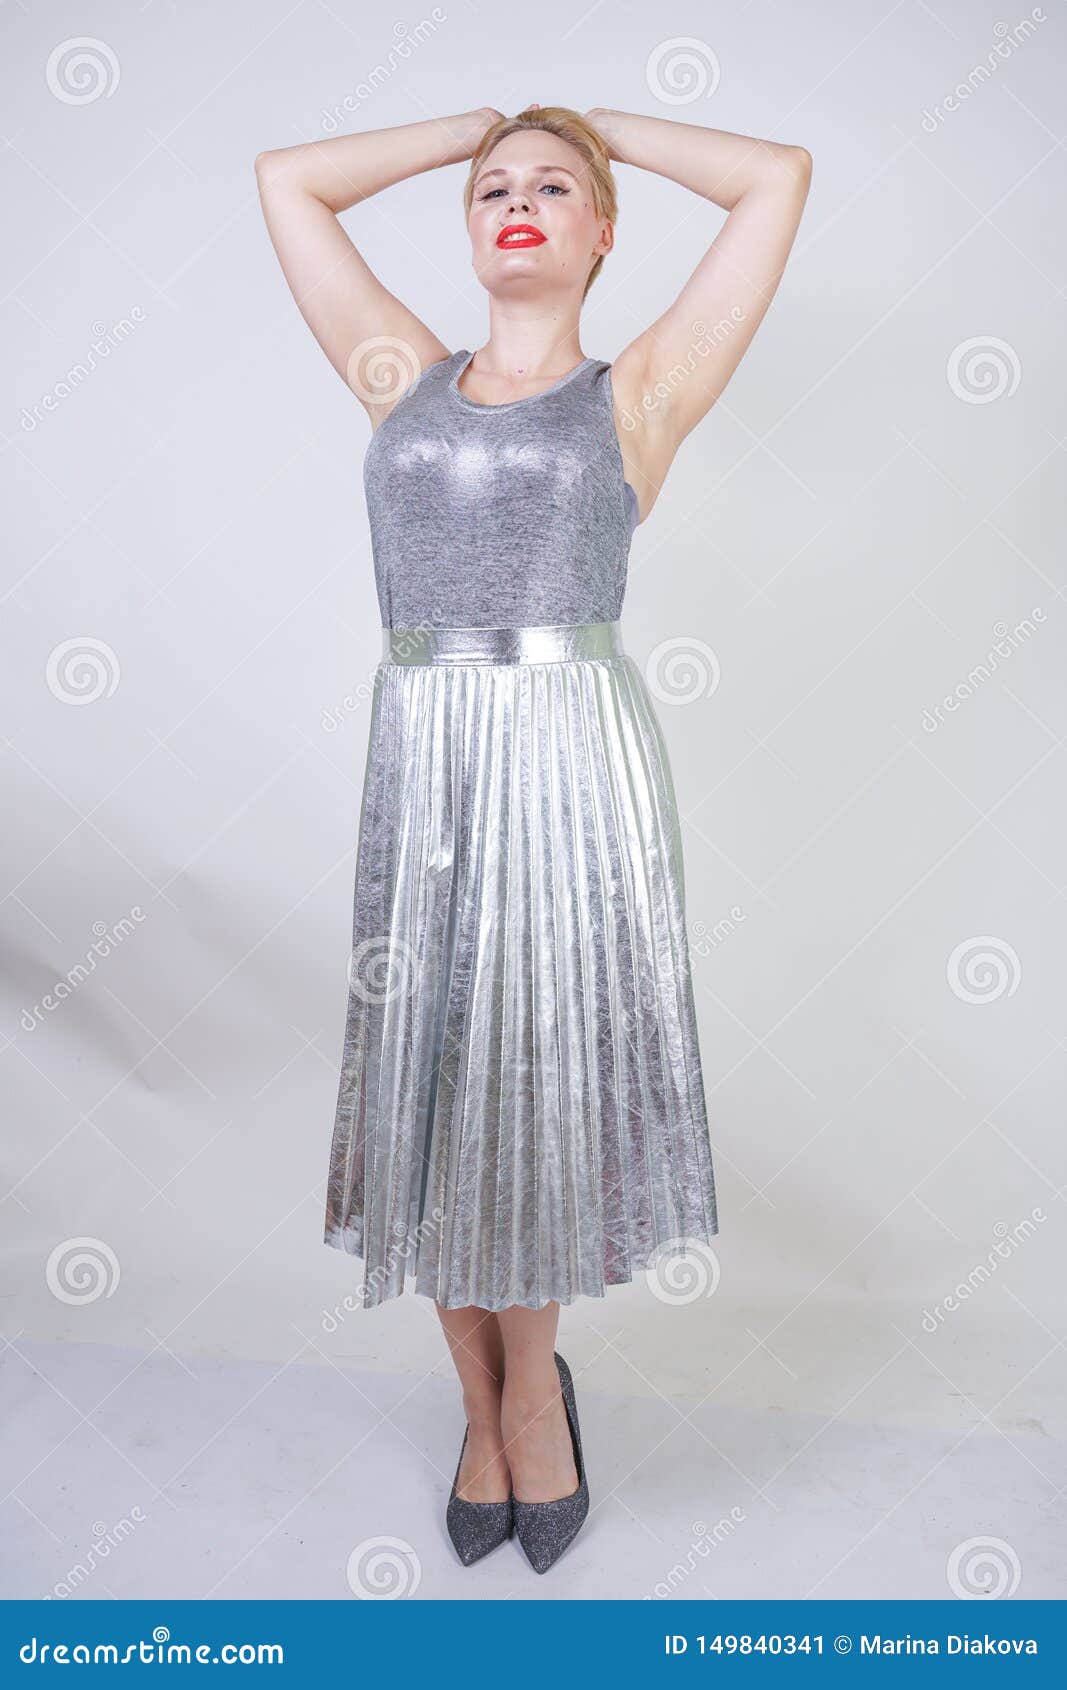 Beautiful Curvy Girl with Short Hair in Silver Tank Top and Metallic Pleated Skirt Stands White Background in Studio. Blonde Pl Stock Image - of artistic, attractive: 149840341